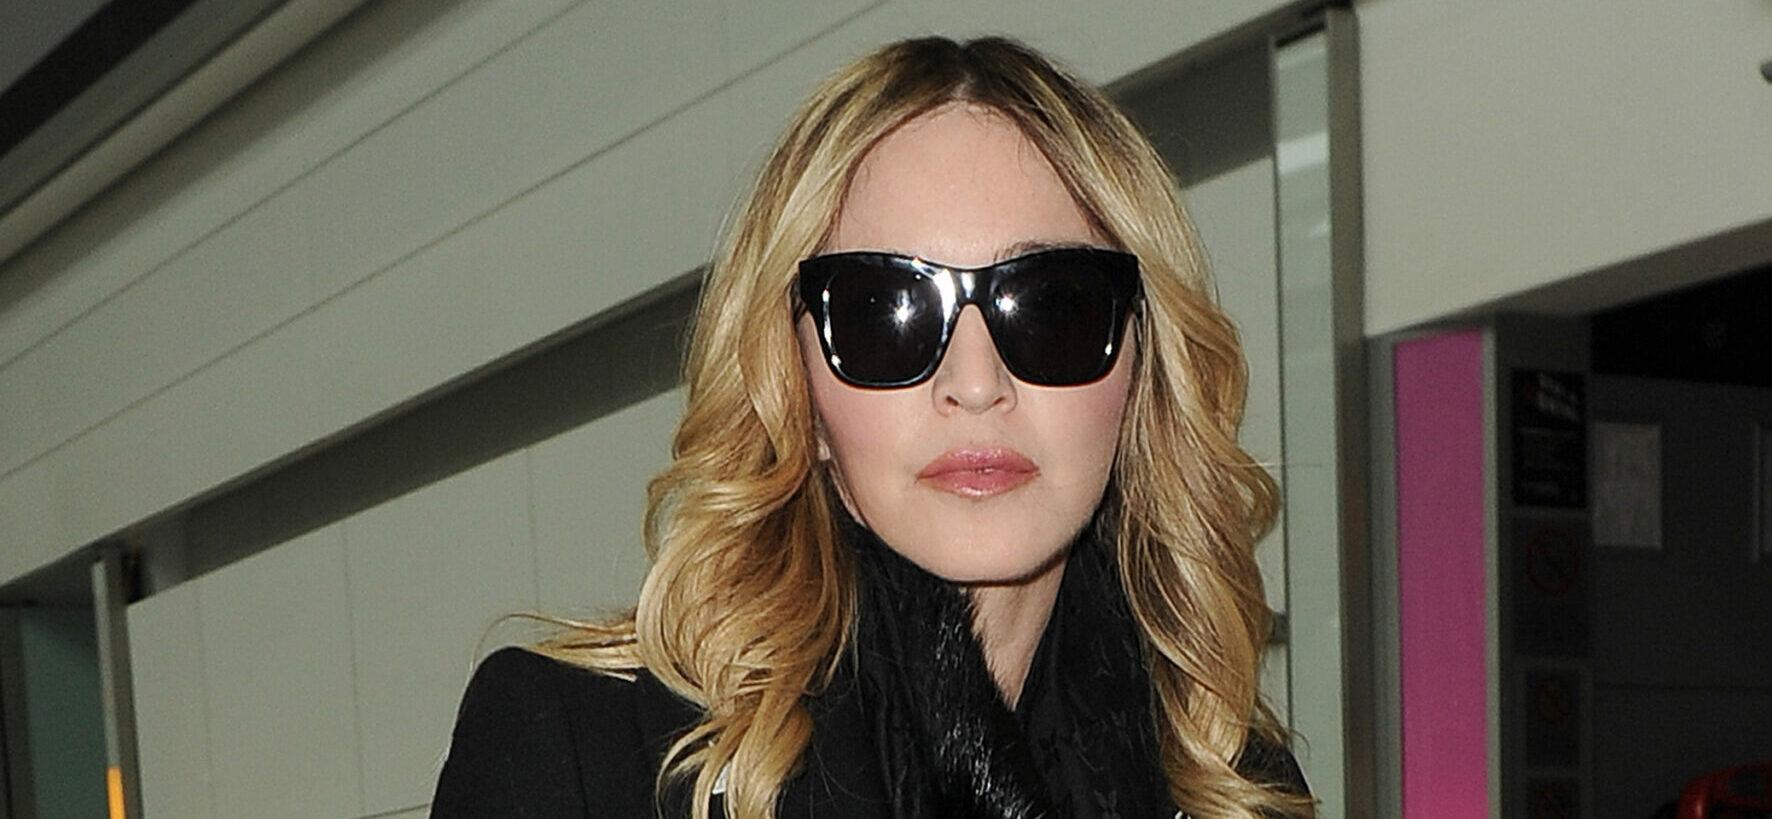 Madonna Trying To ‘Slowly Dissolve Fillers’ And Achieve Natural Look Before Going On Tour